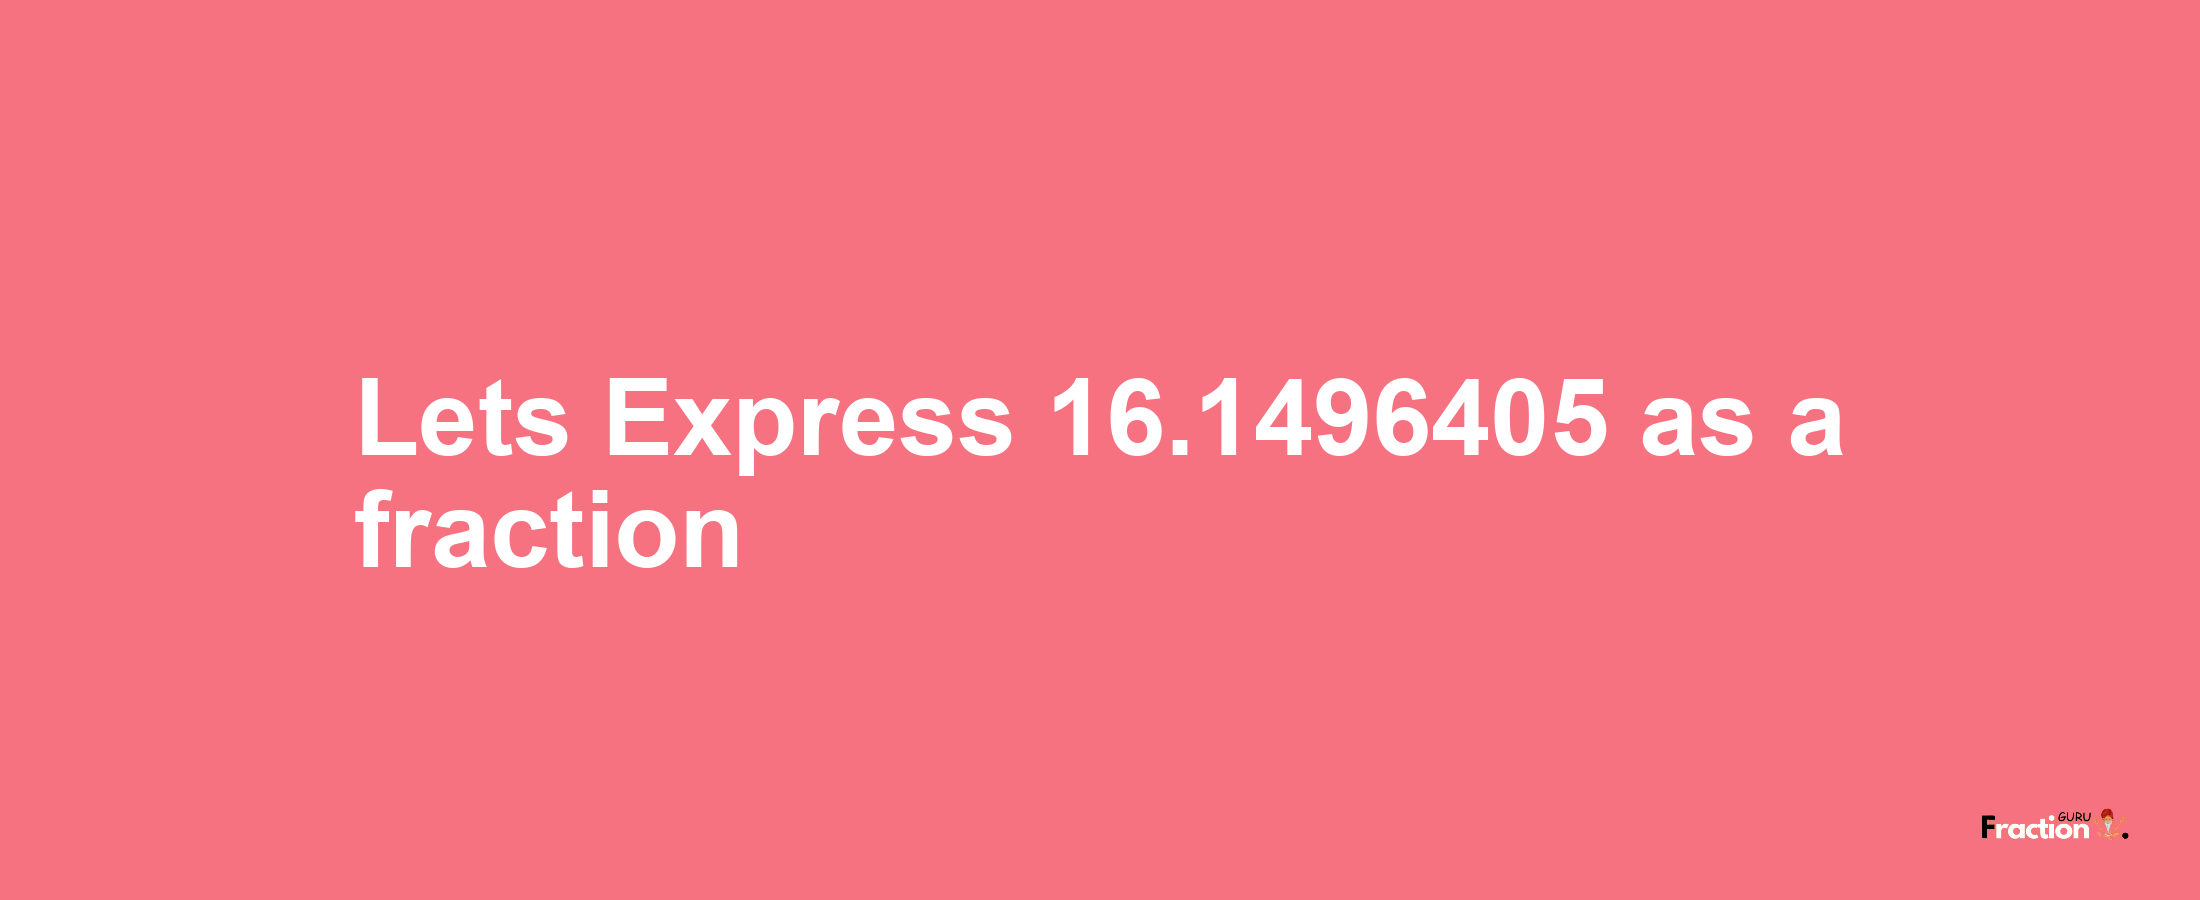 Lets Express 16.1496405 as afraction